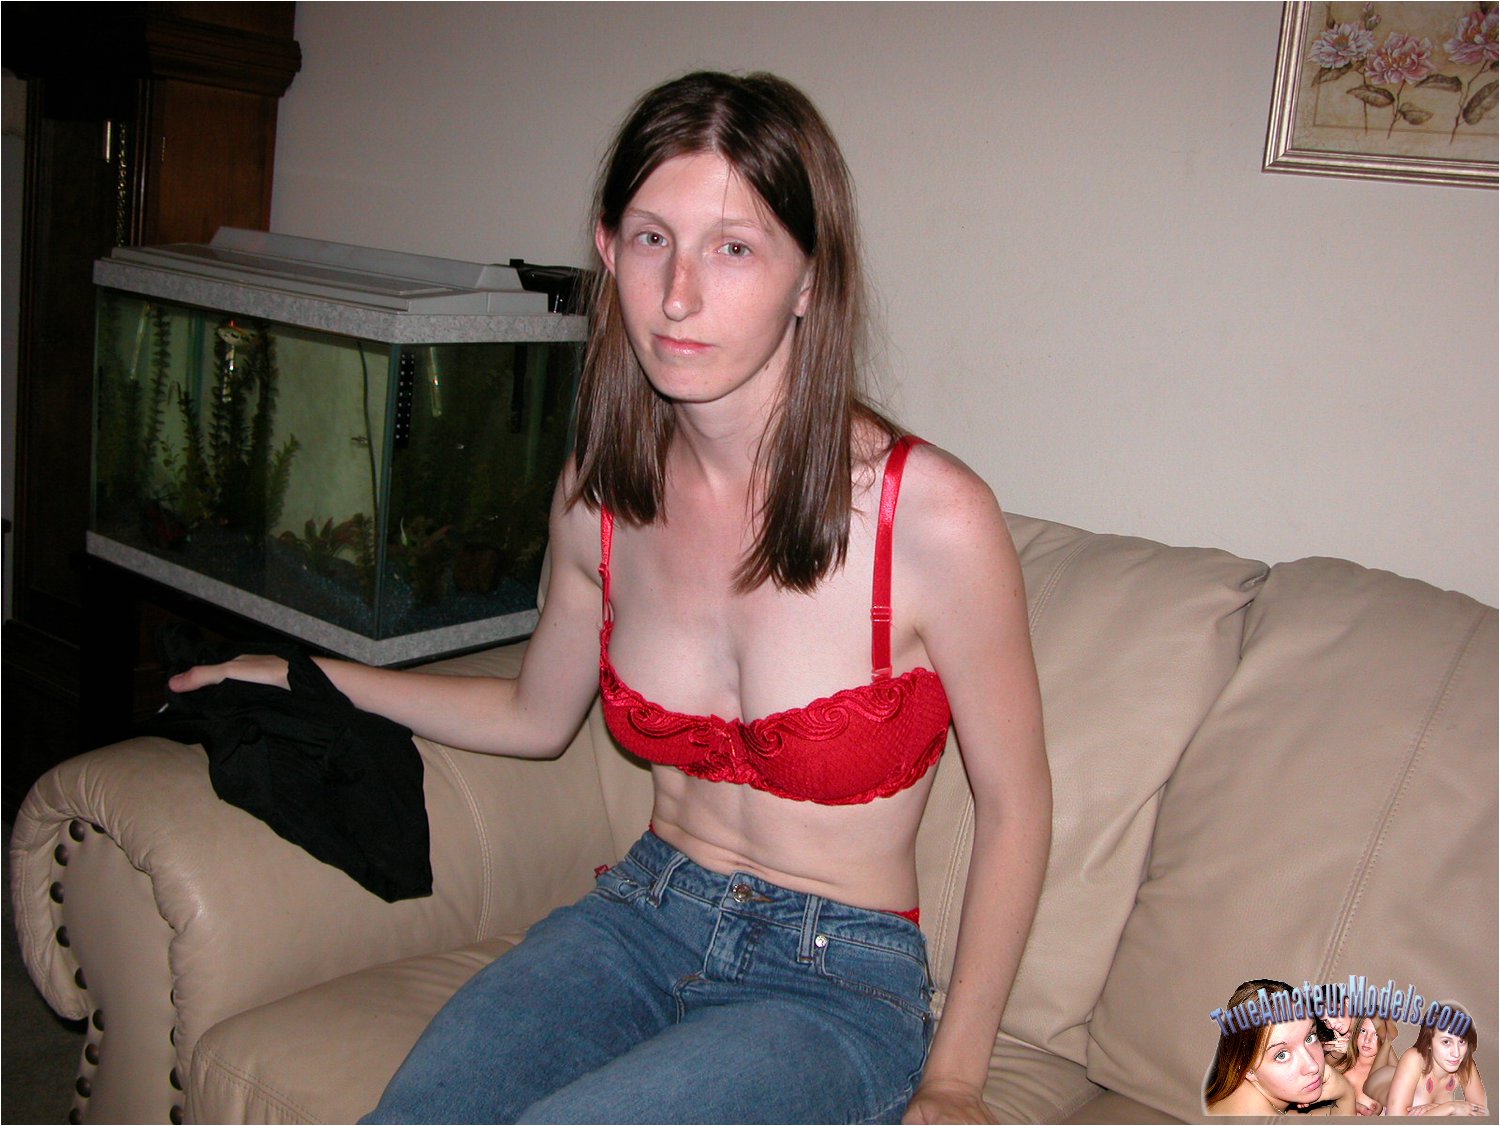 wpid-skanky-amateur-girl-amy-convinced-to-come-over-and-finger-her-pussy-on-camera3.jpg